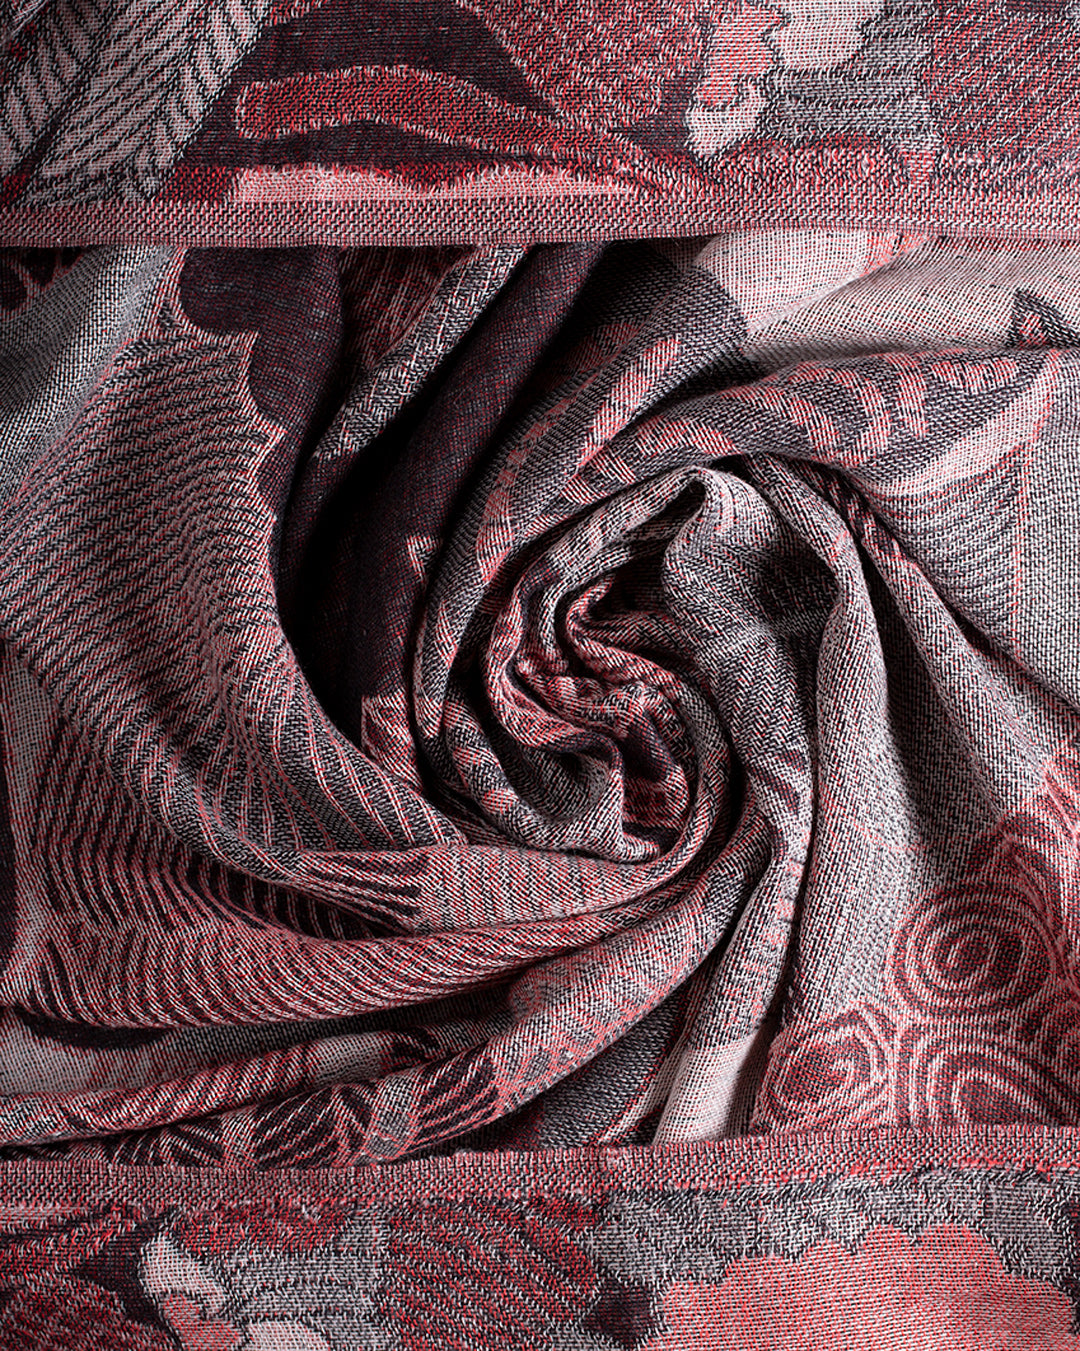 Wine and grey abstract jungle pattern scarf twisted into a swirl as flat lay.